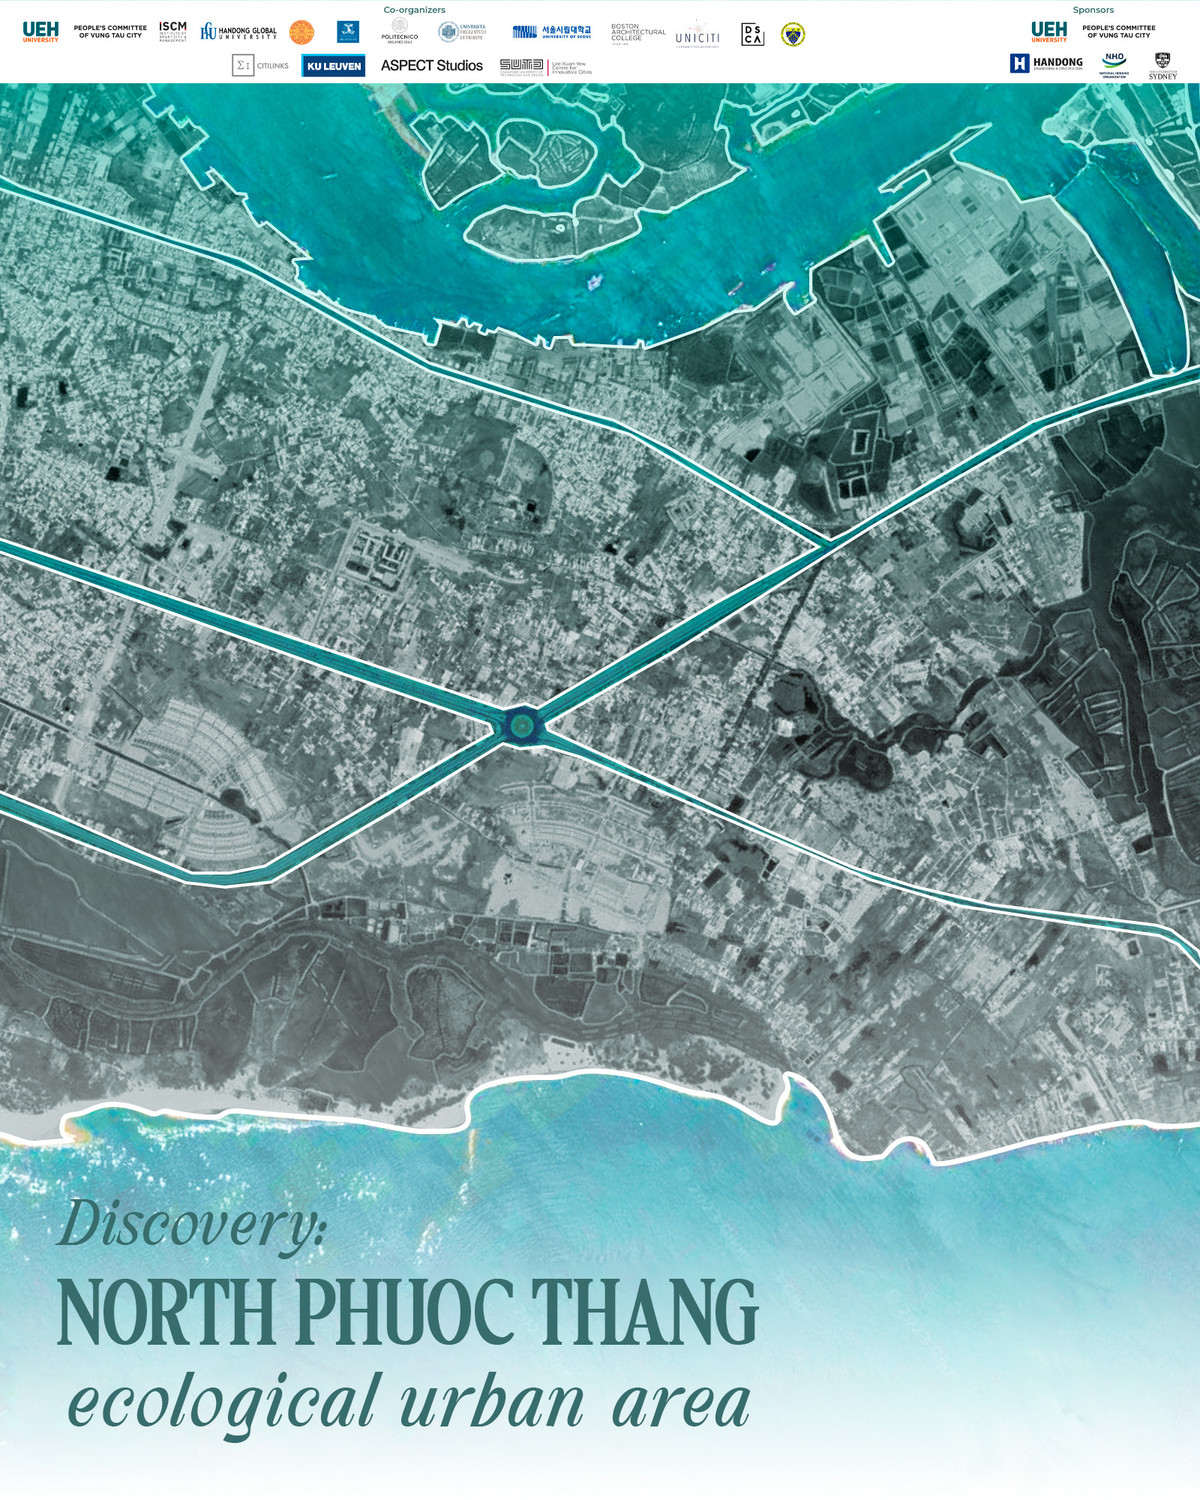 DISCOVERY: NORTH PHUOC THANG ECOLOGICAL URBAN AREA OF VUNG TAU CITY